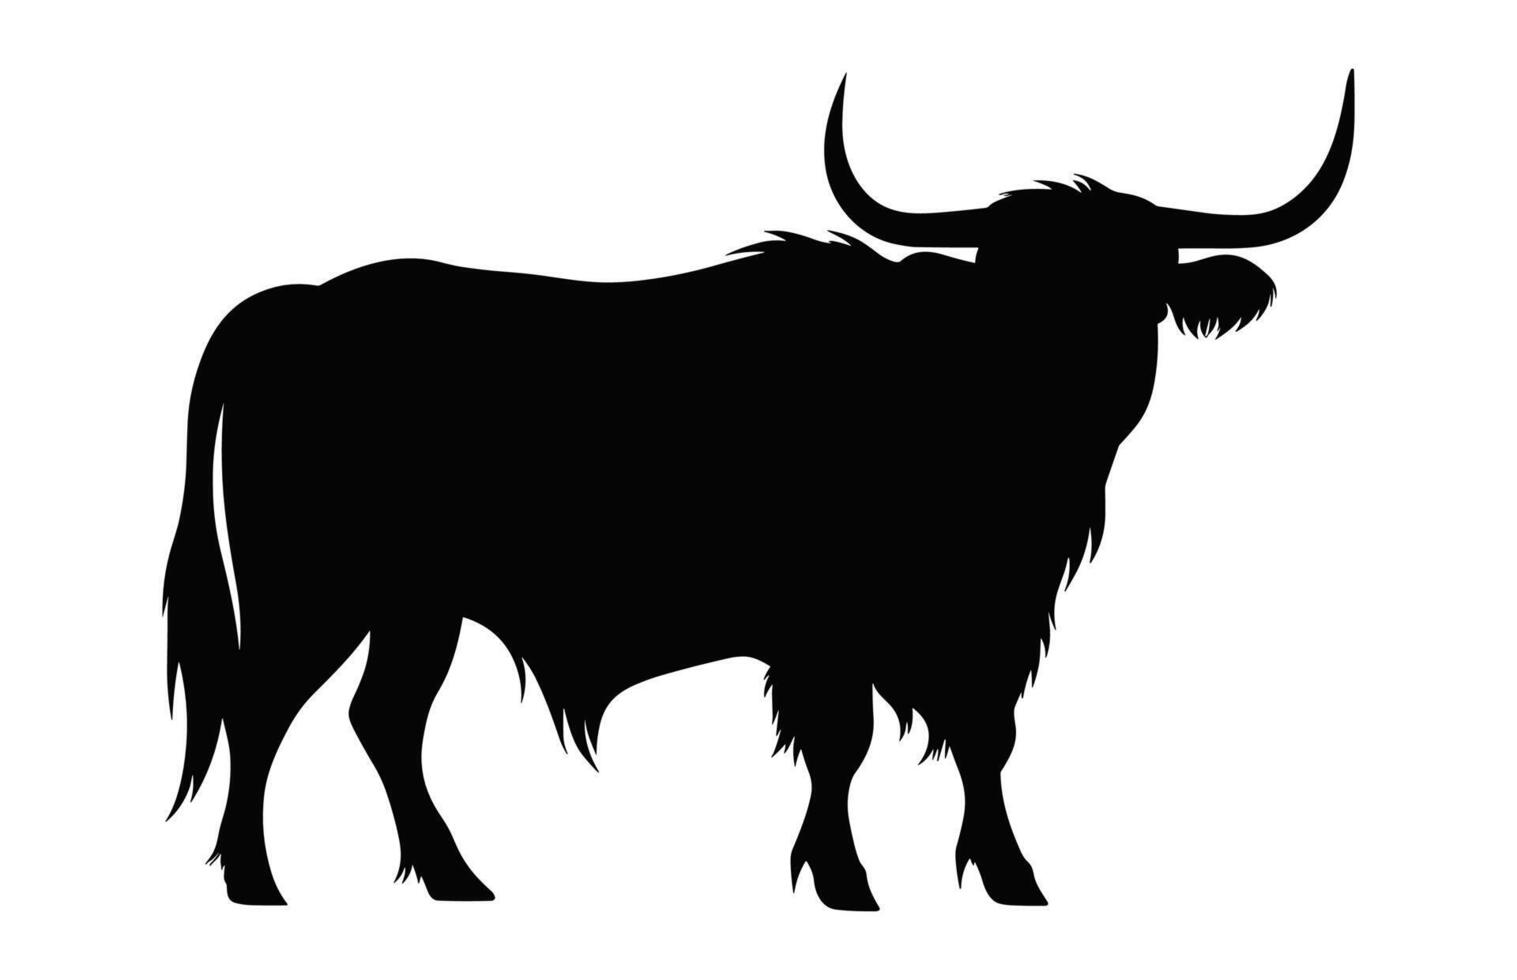 Highland Cattle Cow Silhouette isolated on a white background vector